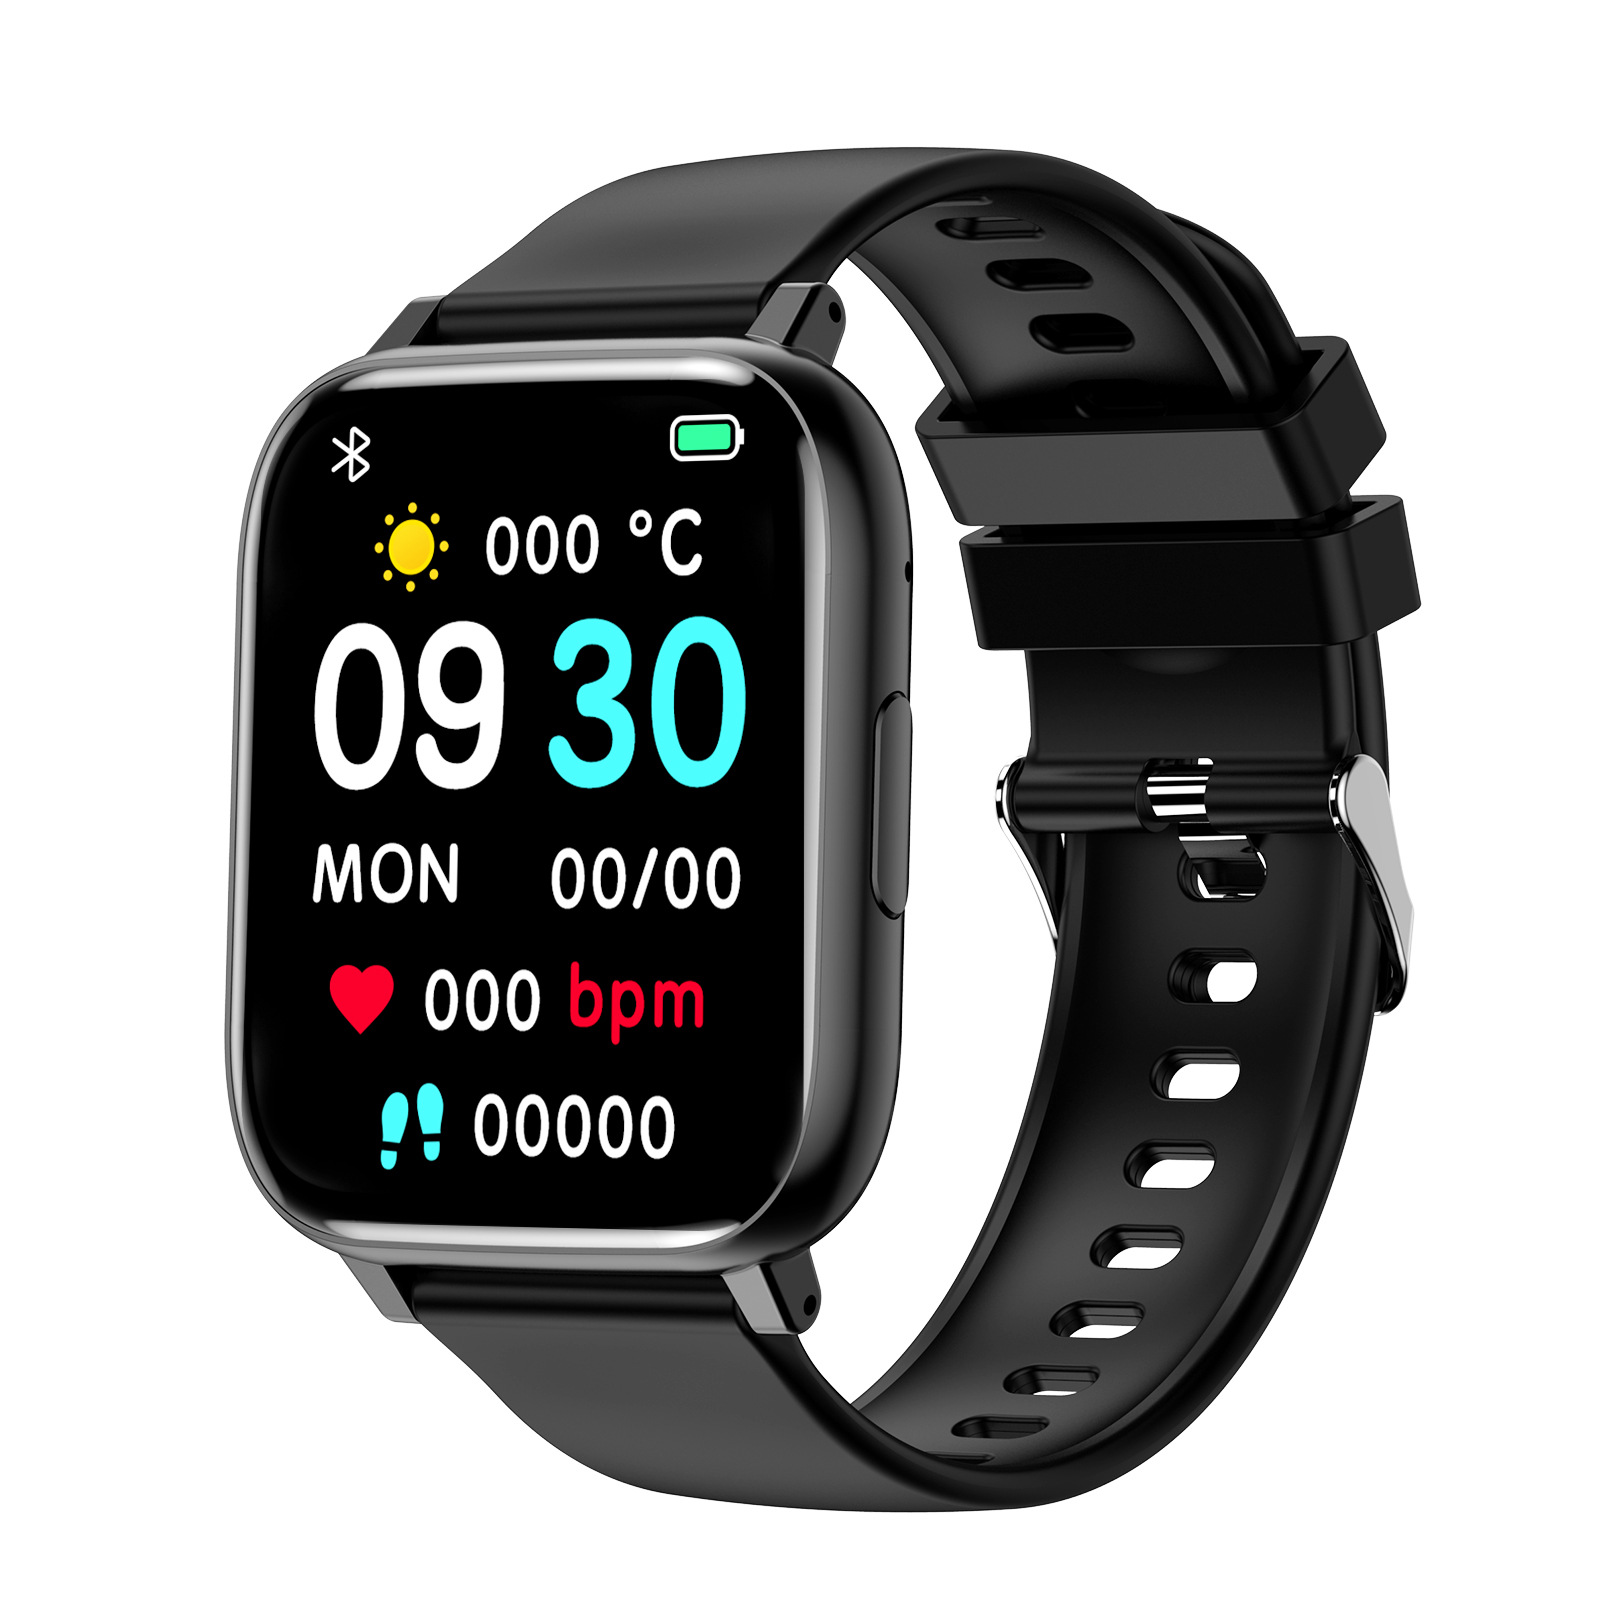 h9 smart watch health monitoring bluetooth calling watch sports heart rate blood oxygen huaqiang north factory cross-border private model